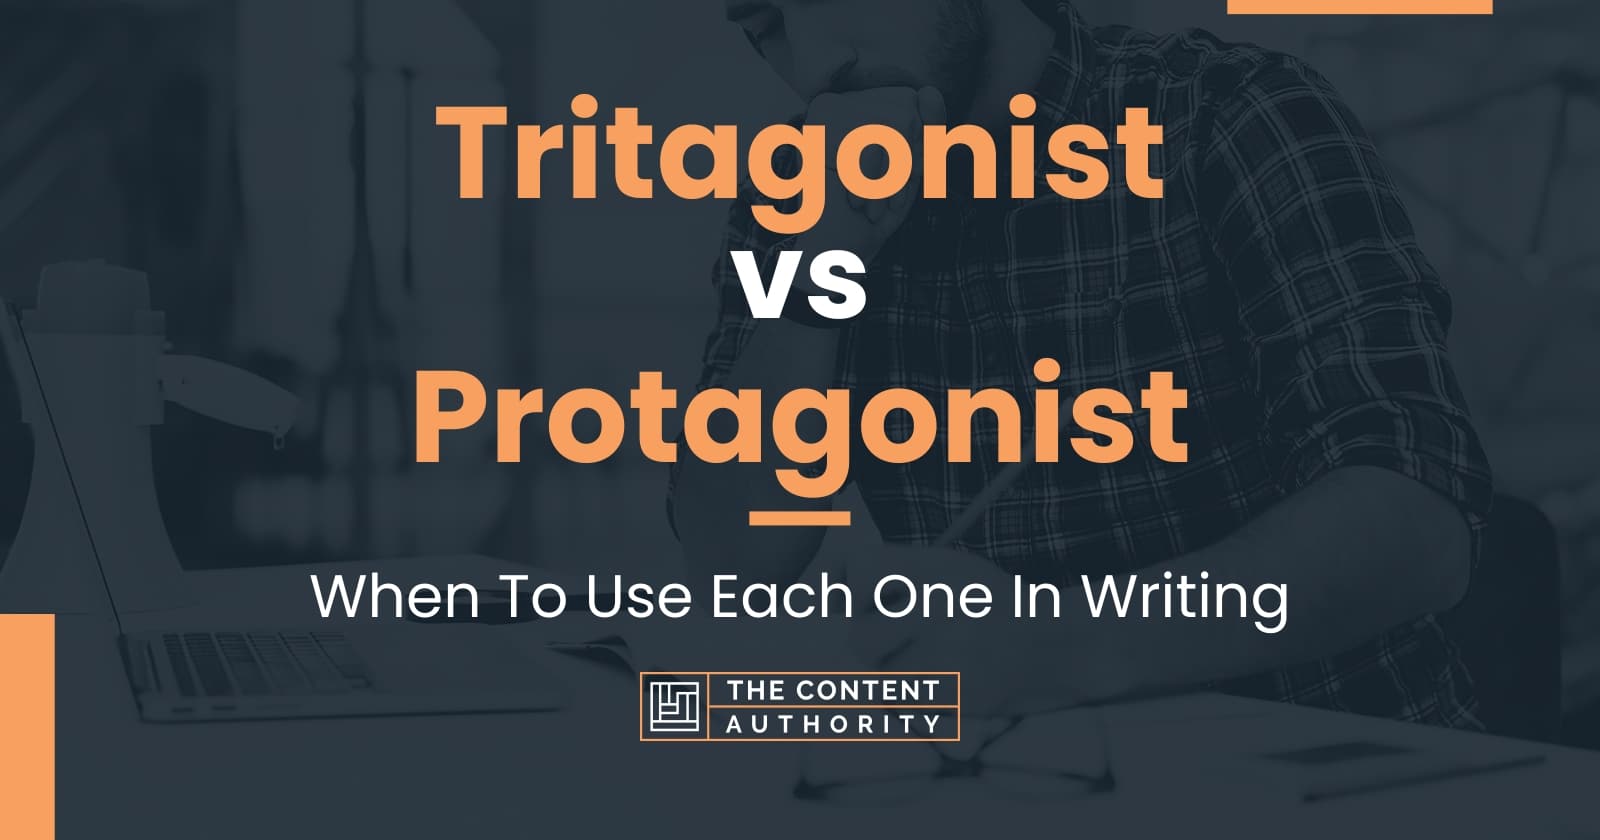 Tritagonist vs Protagonist: When To Use Each One In Writing